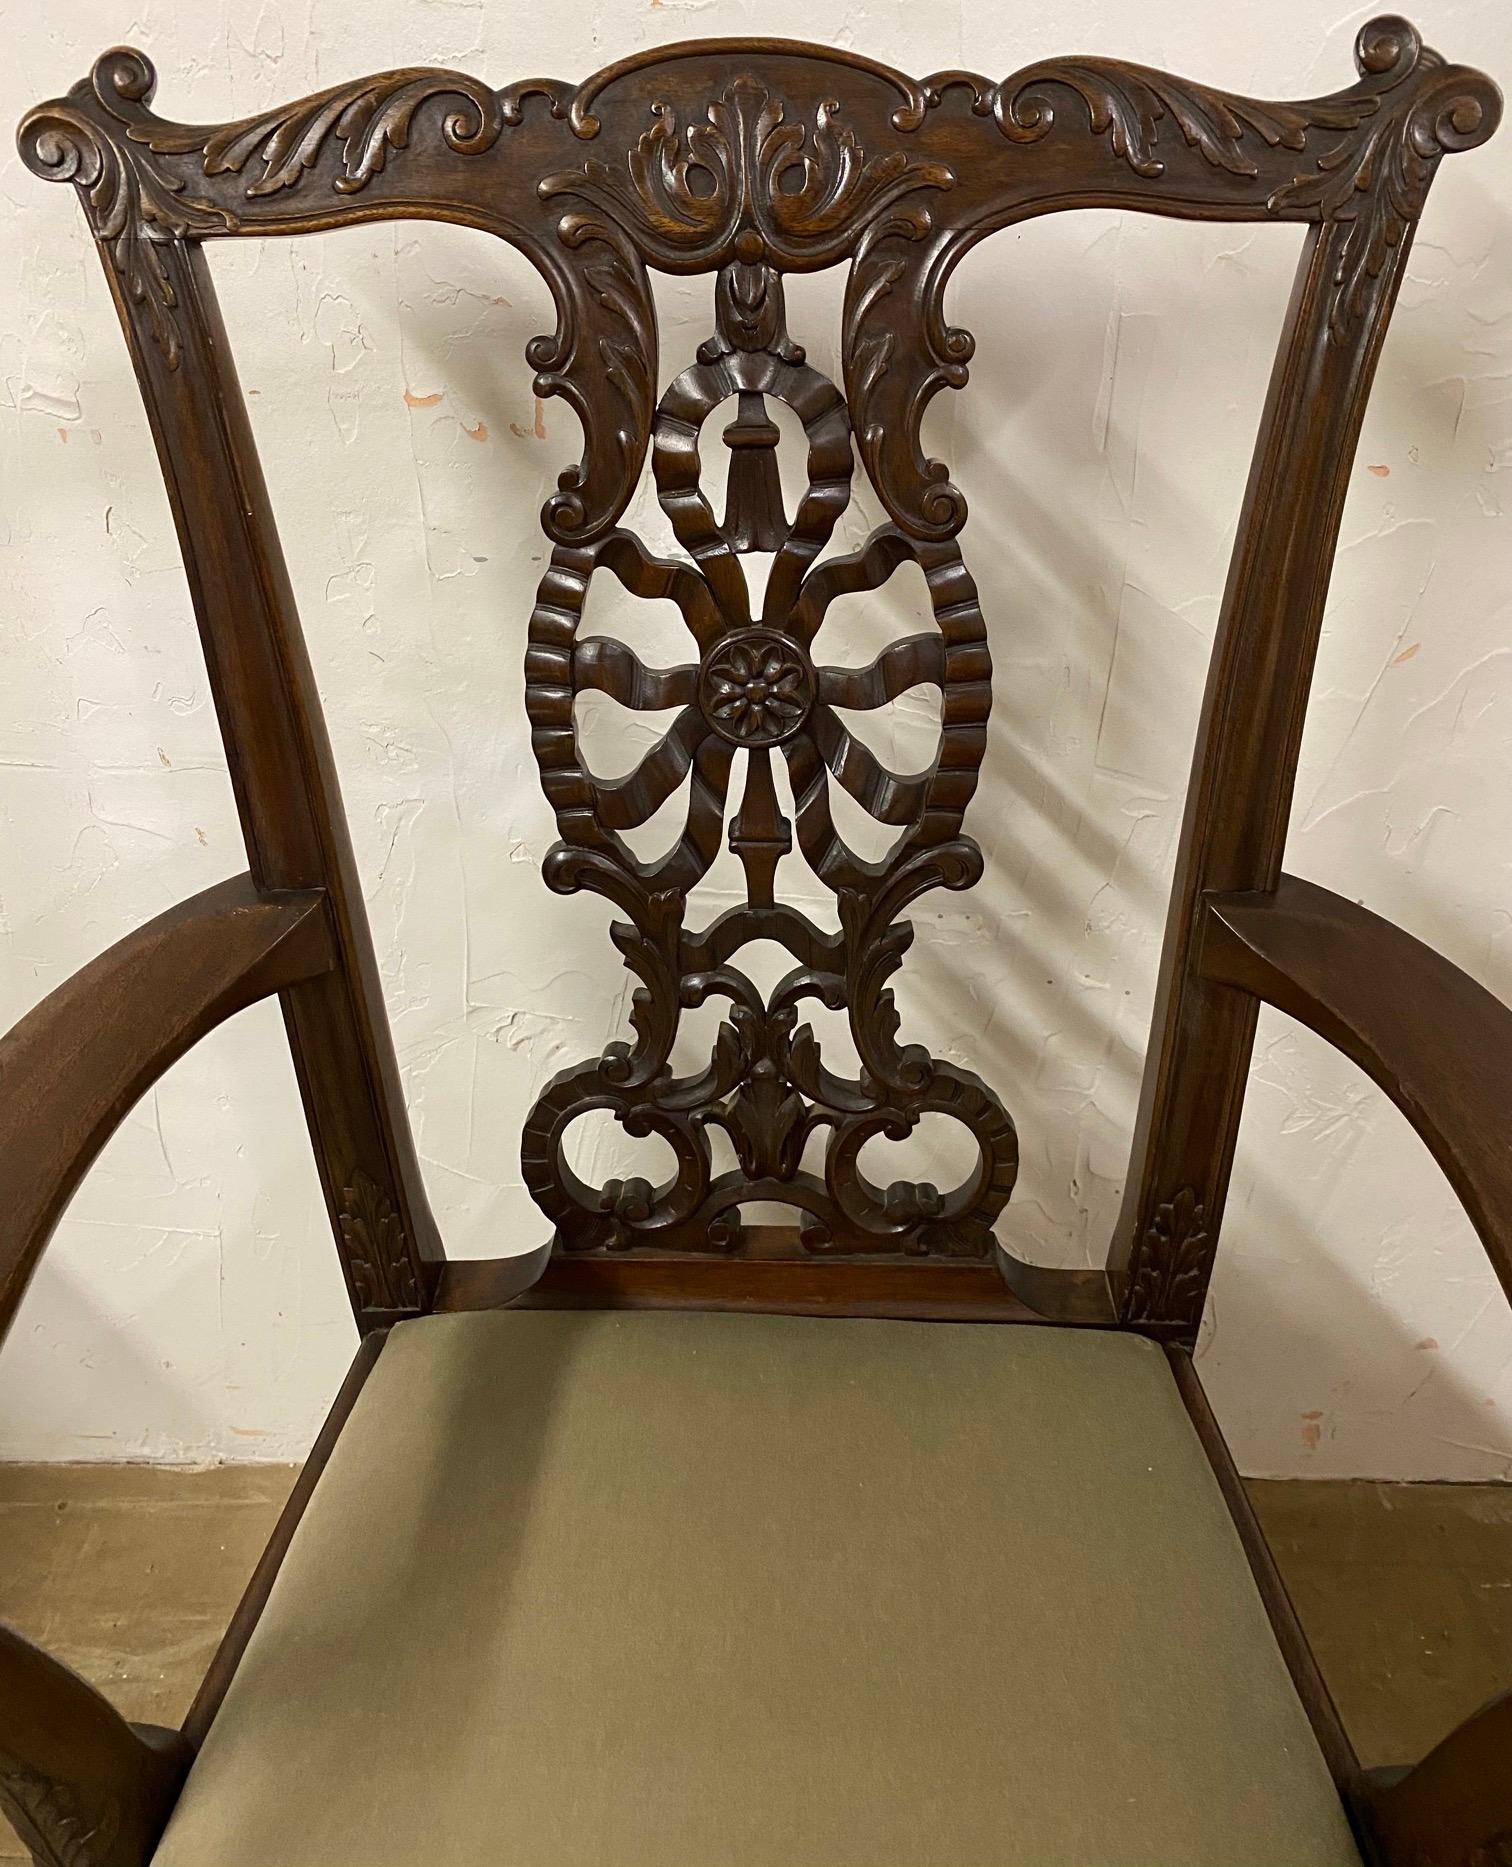 The circa 1900 Chippendale style mahogany armchair has hand carved designs including a back combining a motive of ribbons, a rosette, tassel and leaves. The arms end with eagle heads supported by uprights decorated with acanthus leaves. The front